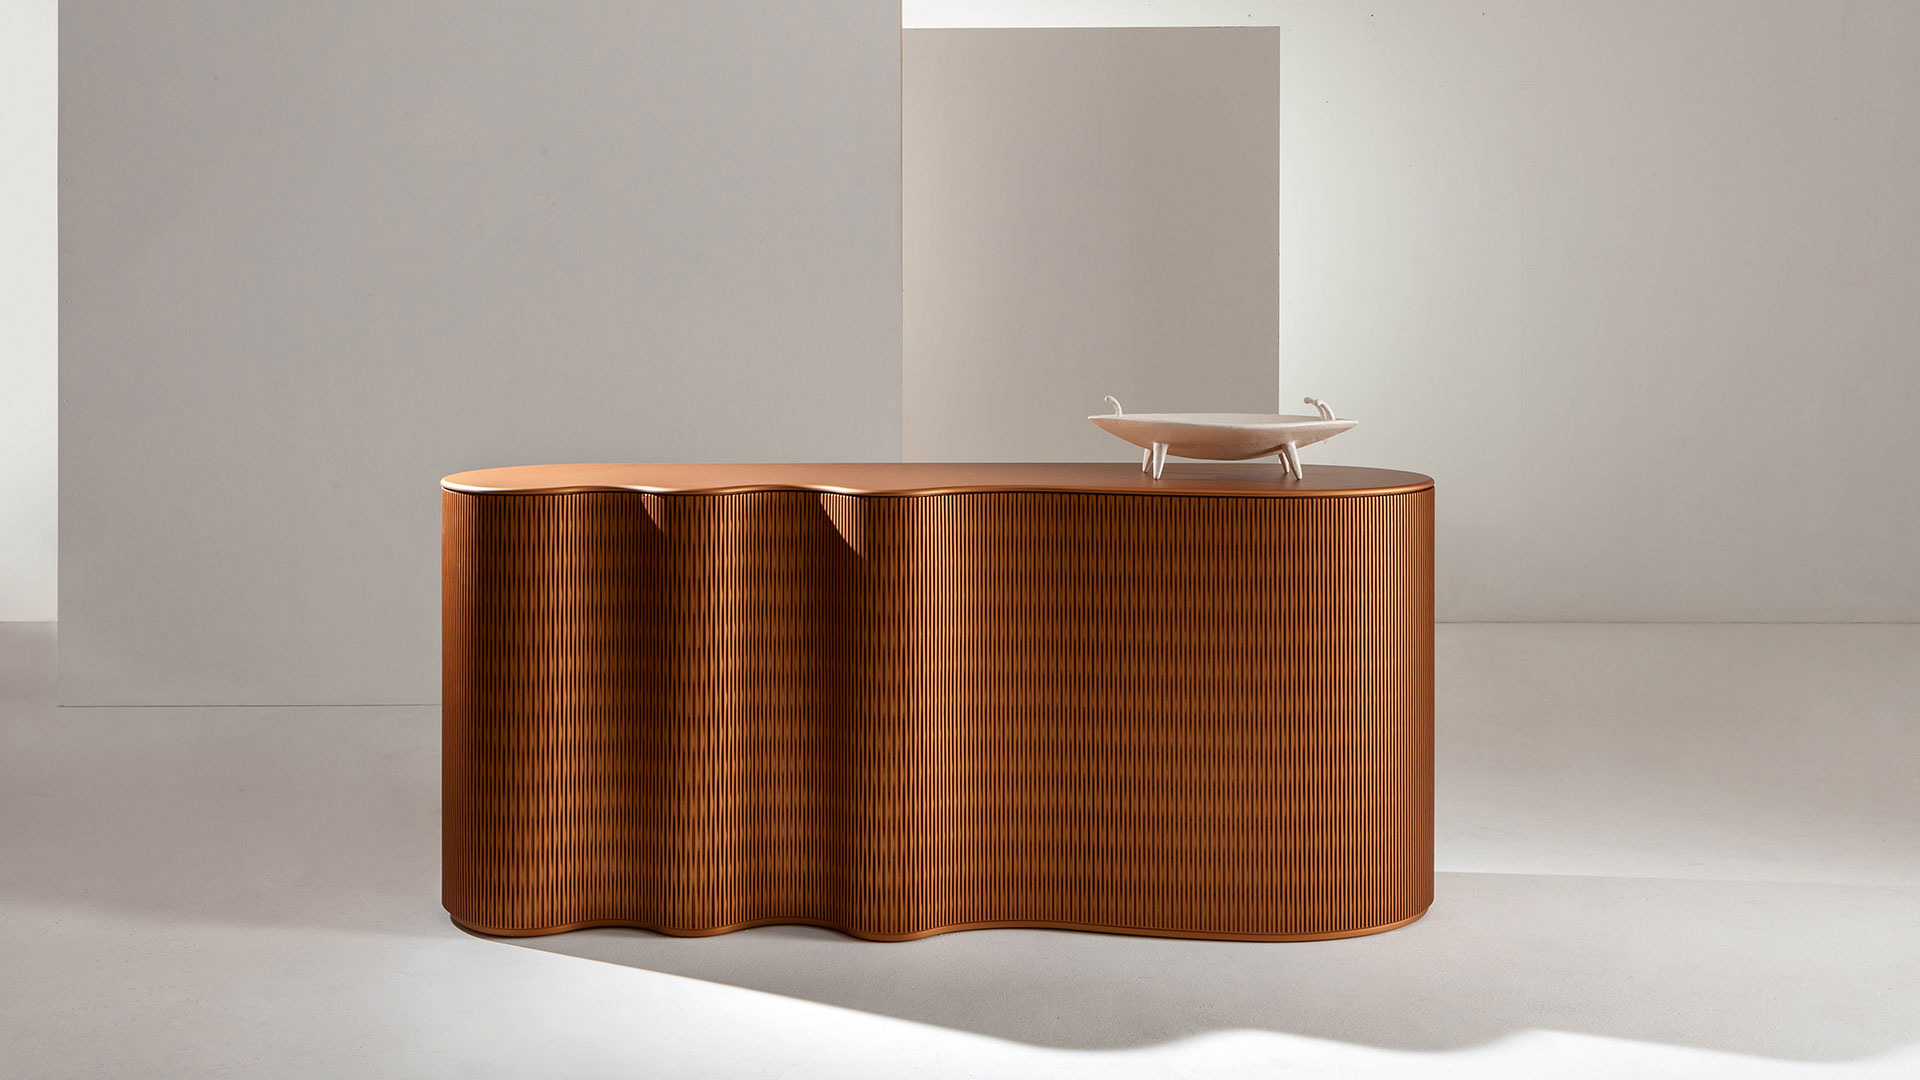 The Infinity console by Laurameroni Design Collection